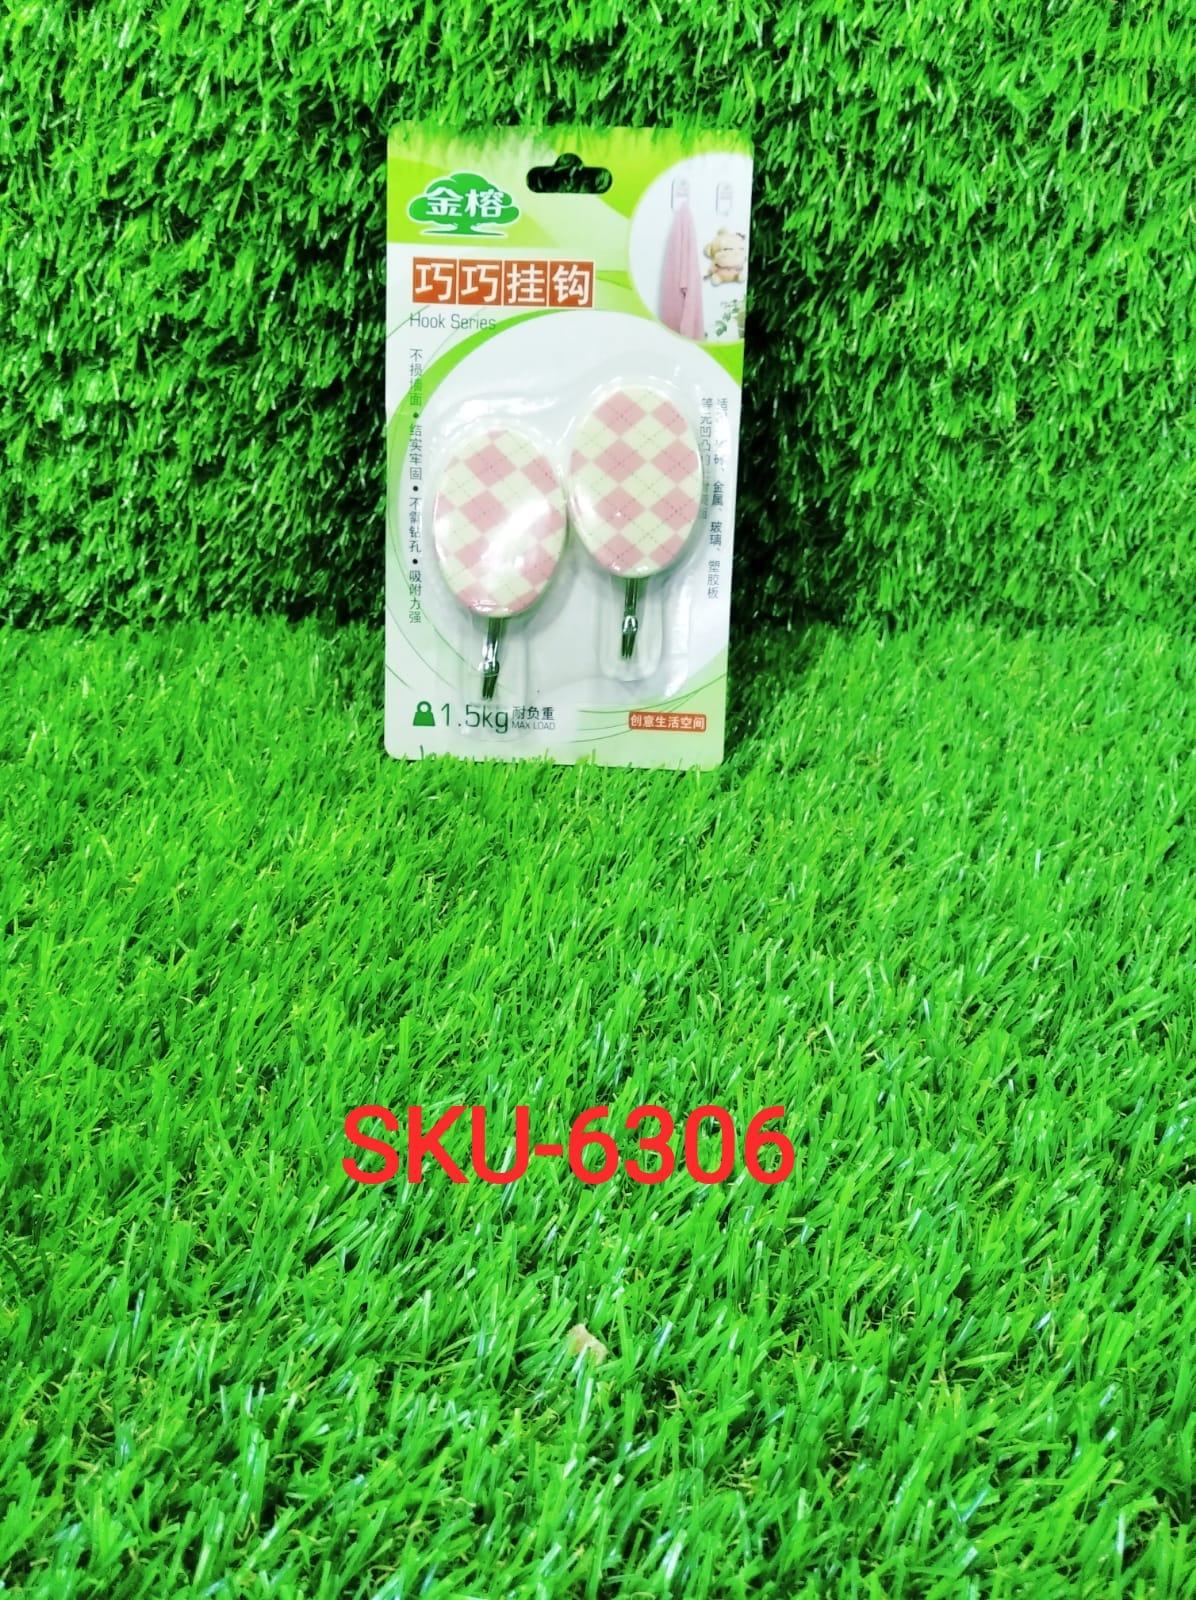 6306 2 Pc Adhesive Hook used in all kinds of household and official places specially, for hanging various cloths, stuffs and items etc. DeoDap